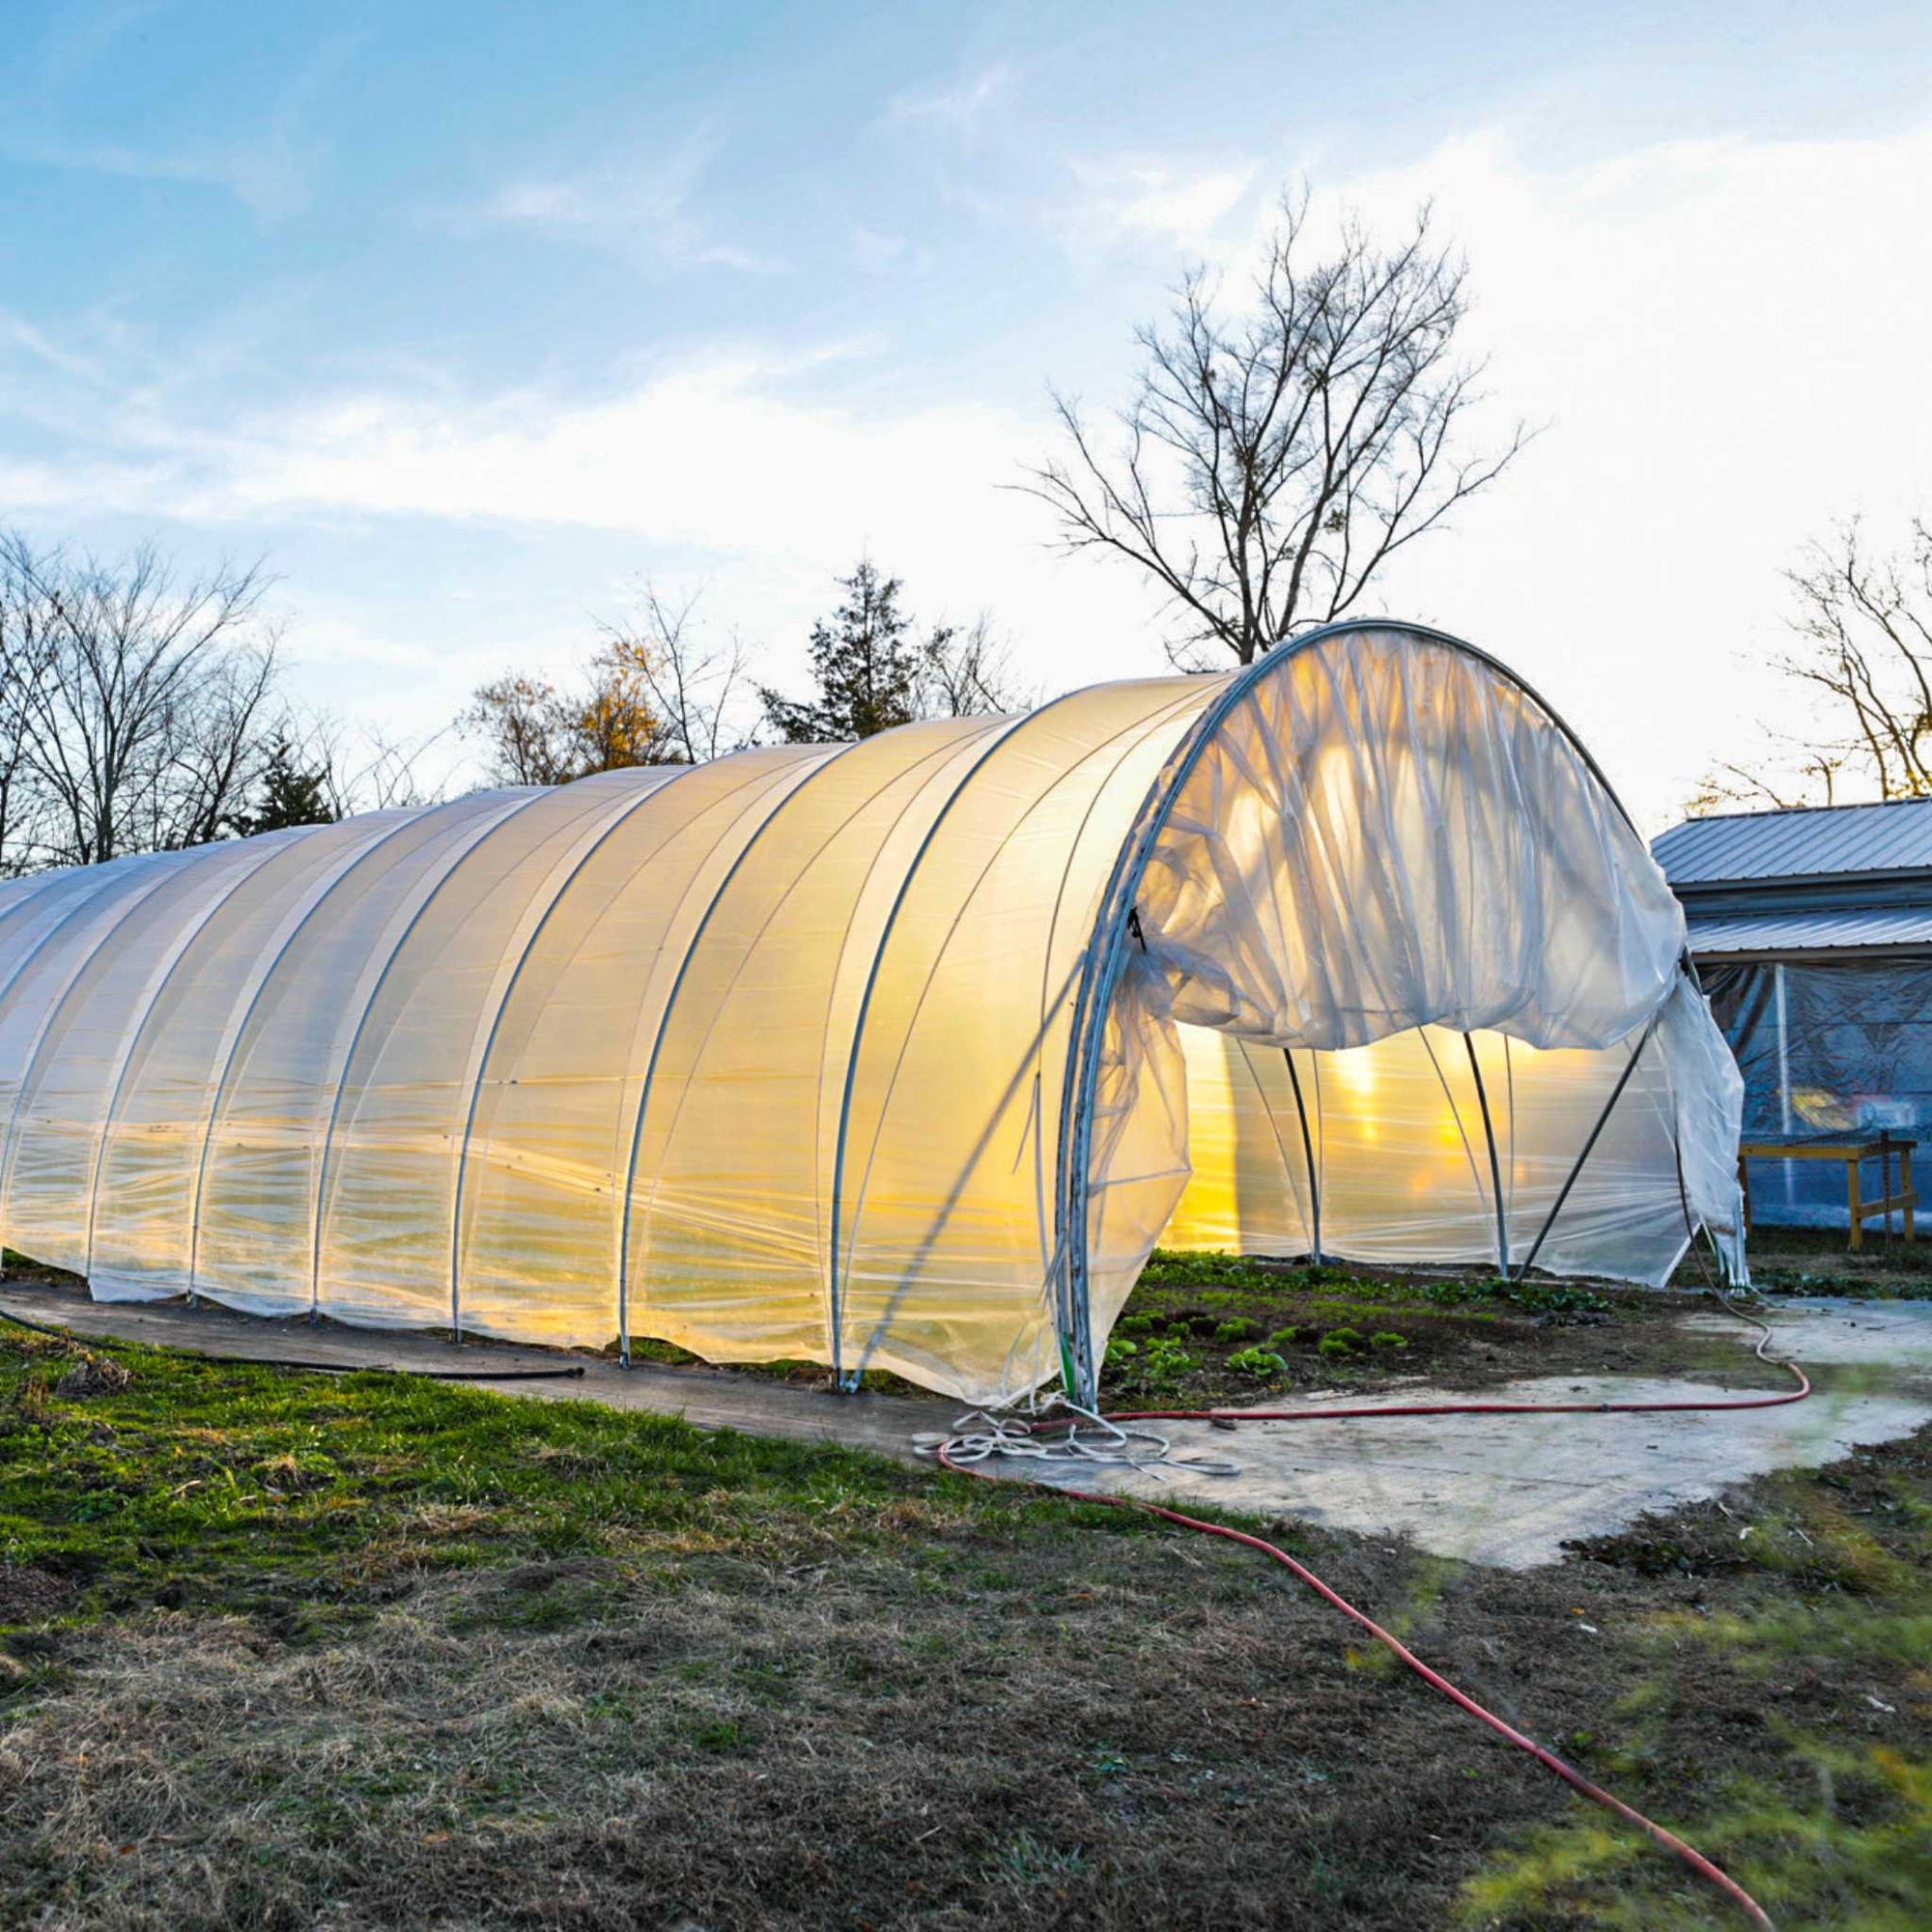 Cat tunnel with butterfly door opened showing greens planted in rows